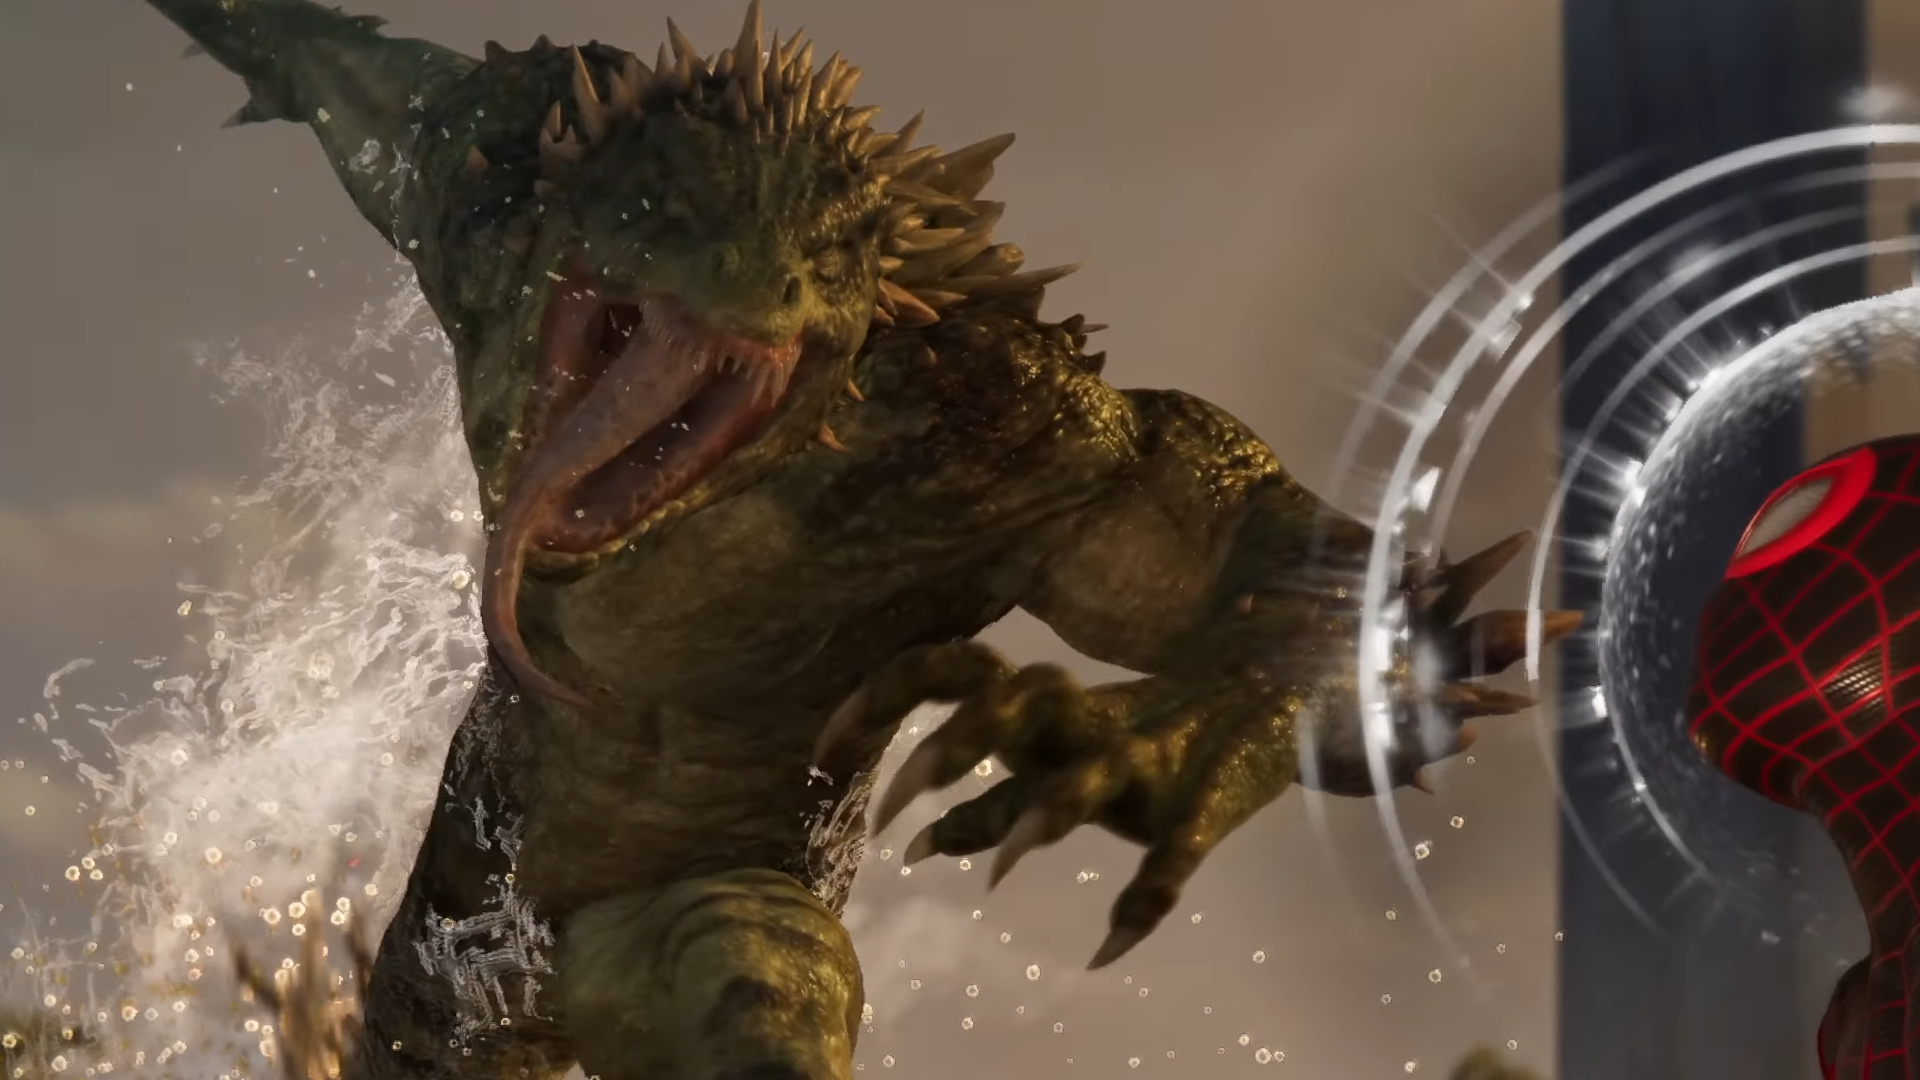 Who Is the Lizard in Marvel's Spider-Man 2? - The Escapist